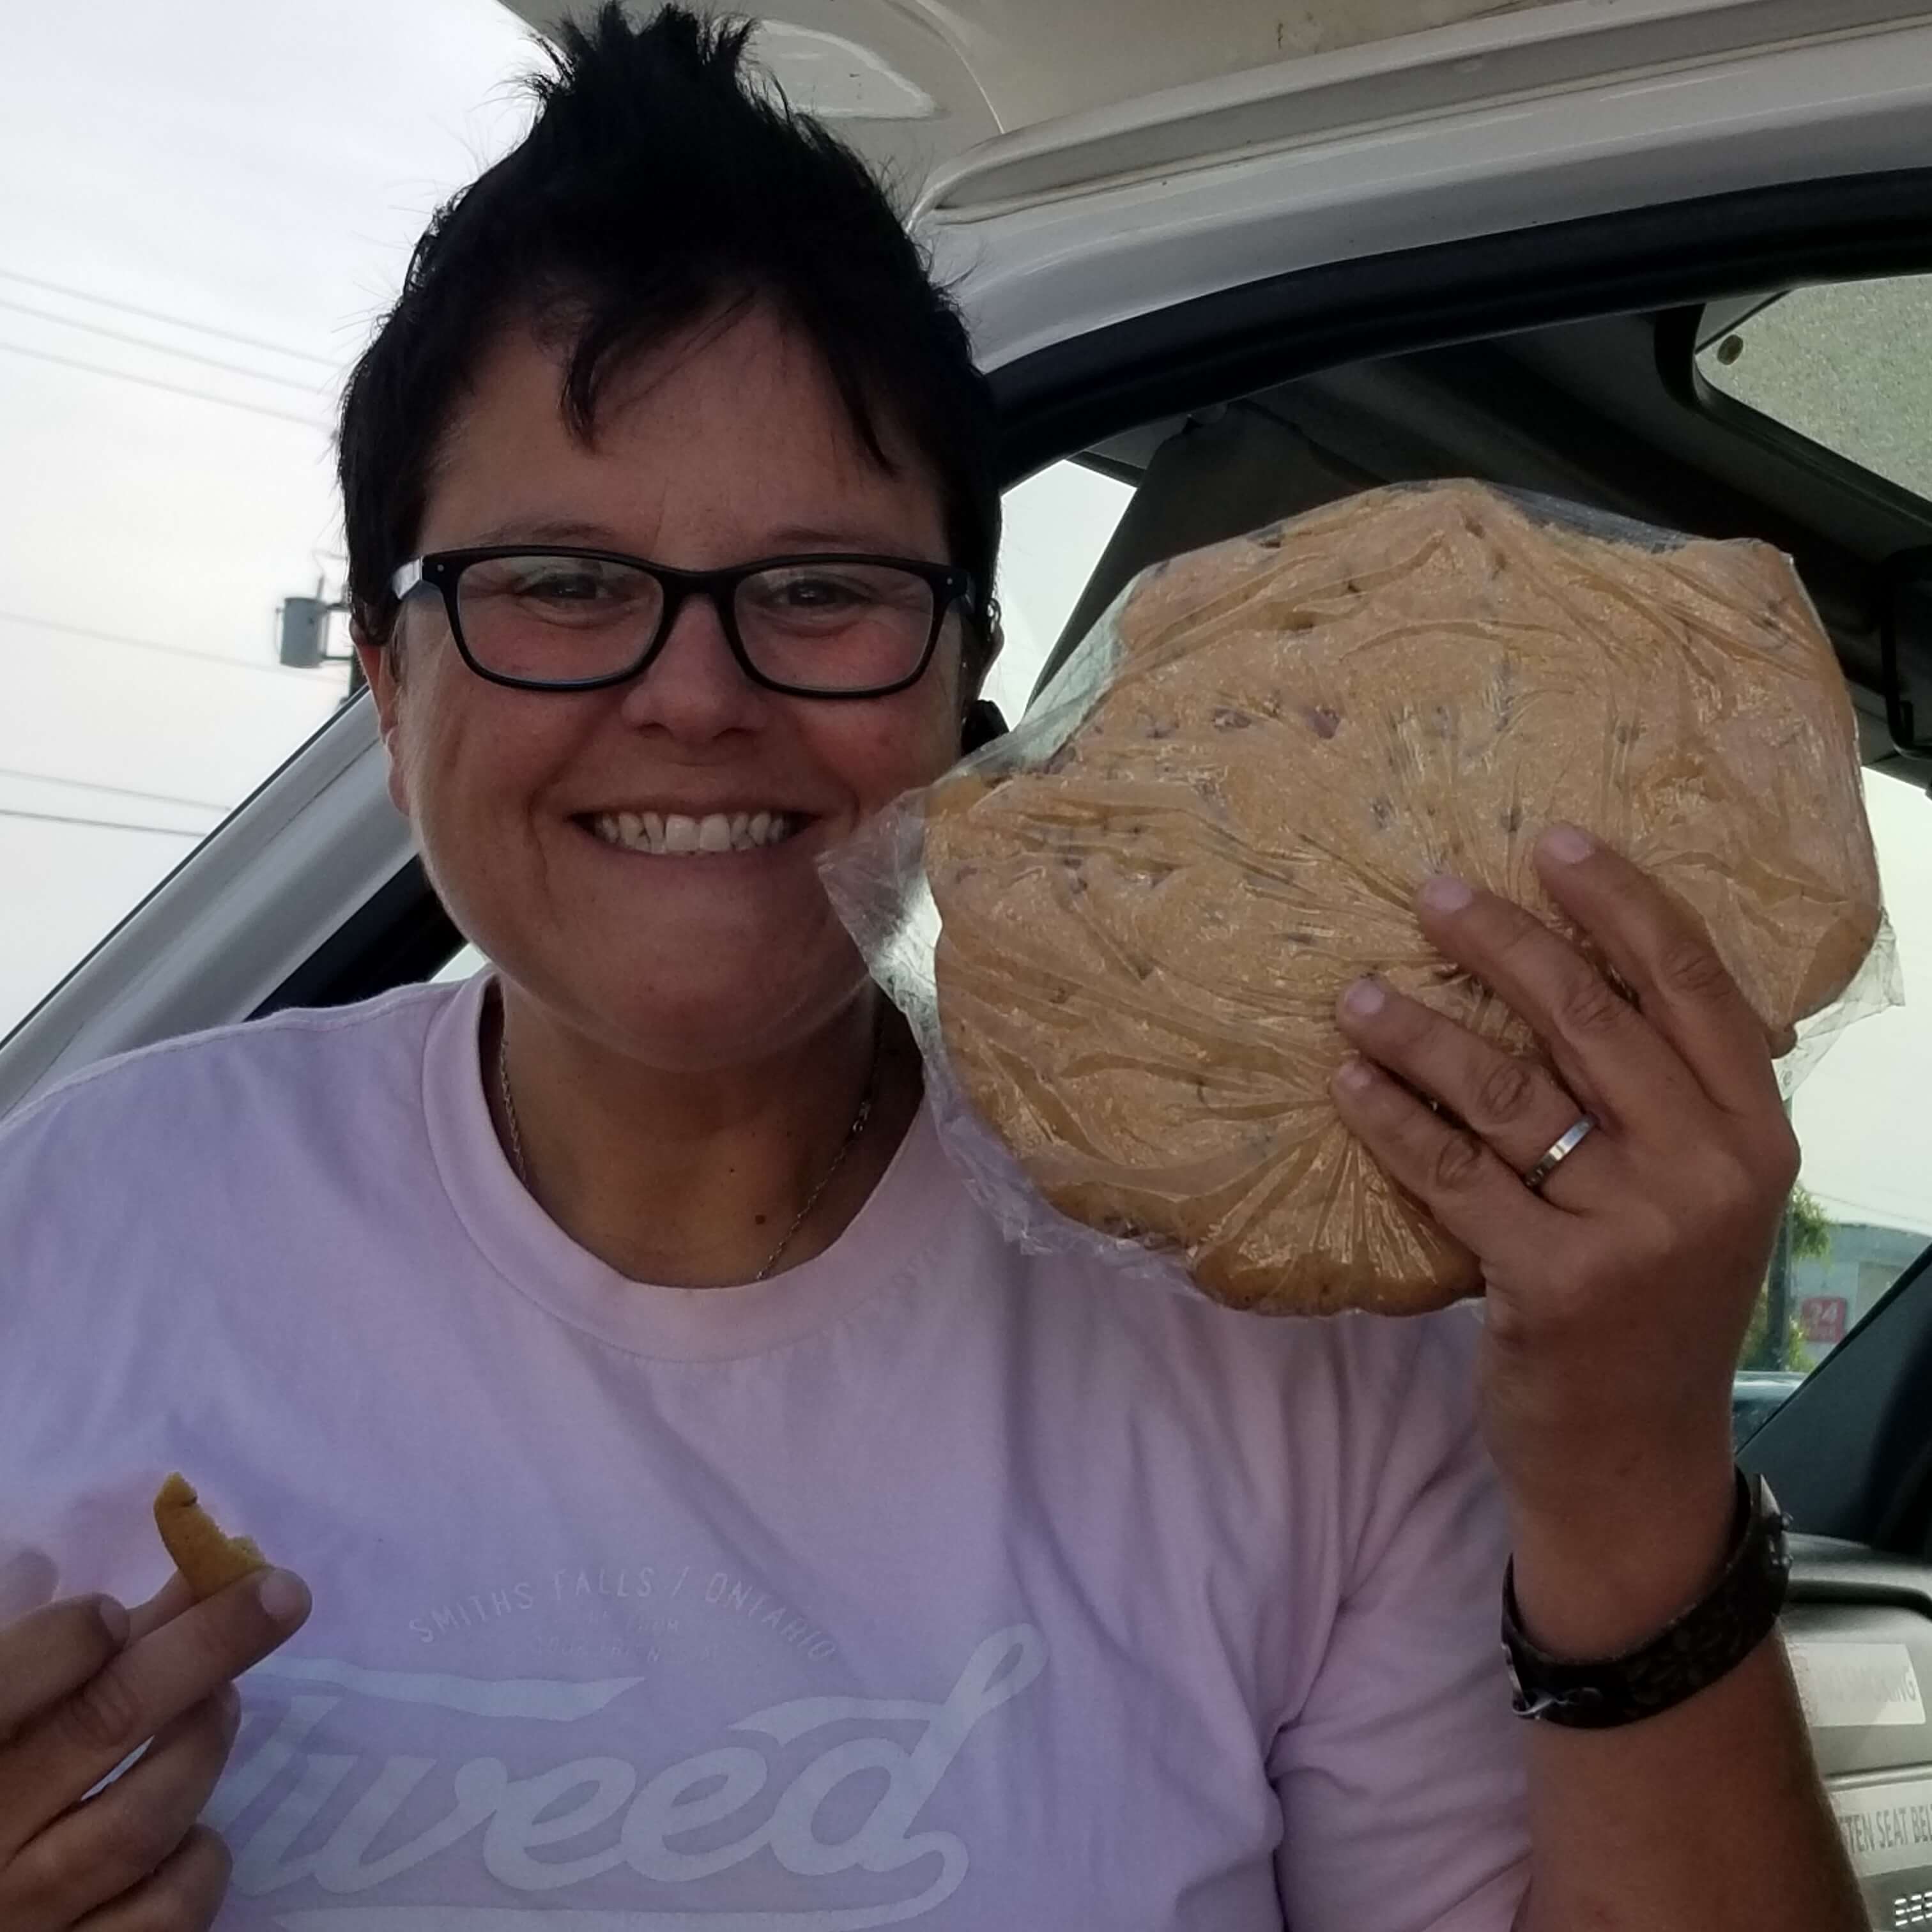 Driver Dianne holding giant cookie